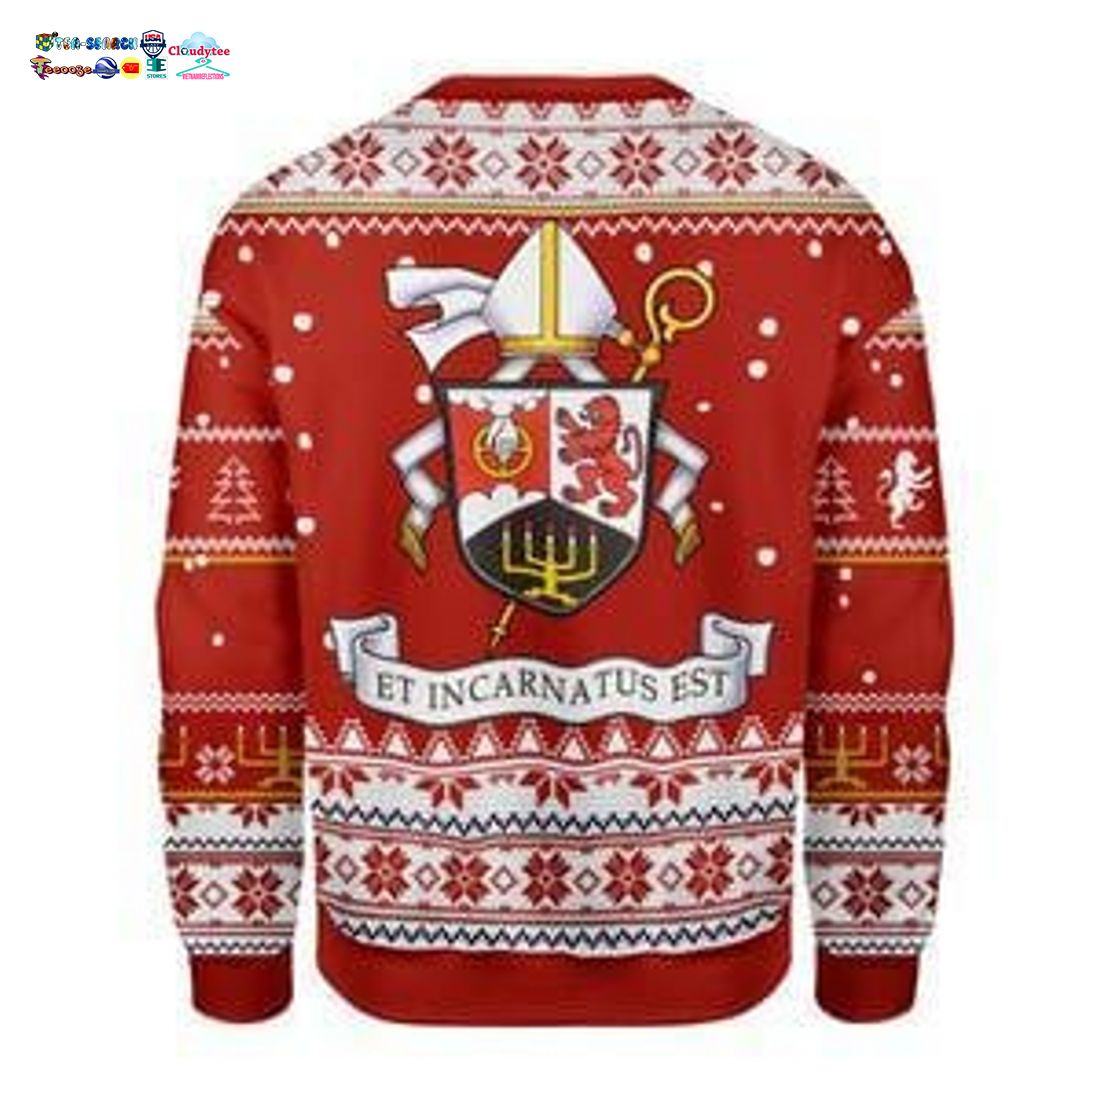 Order Of Saint Benedict Ugly Christmas Sweater